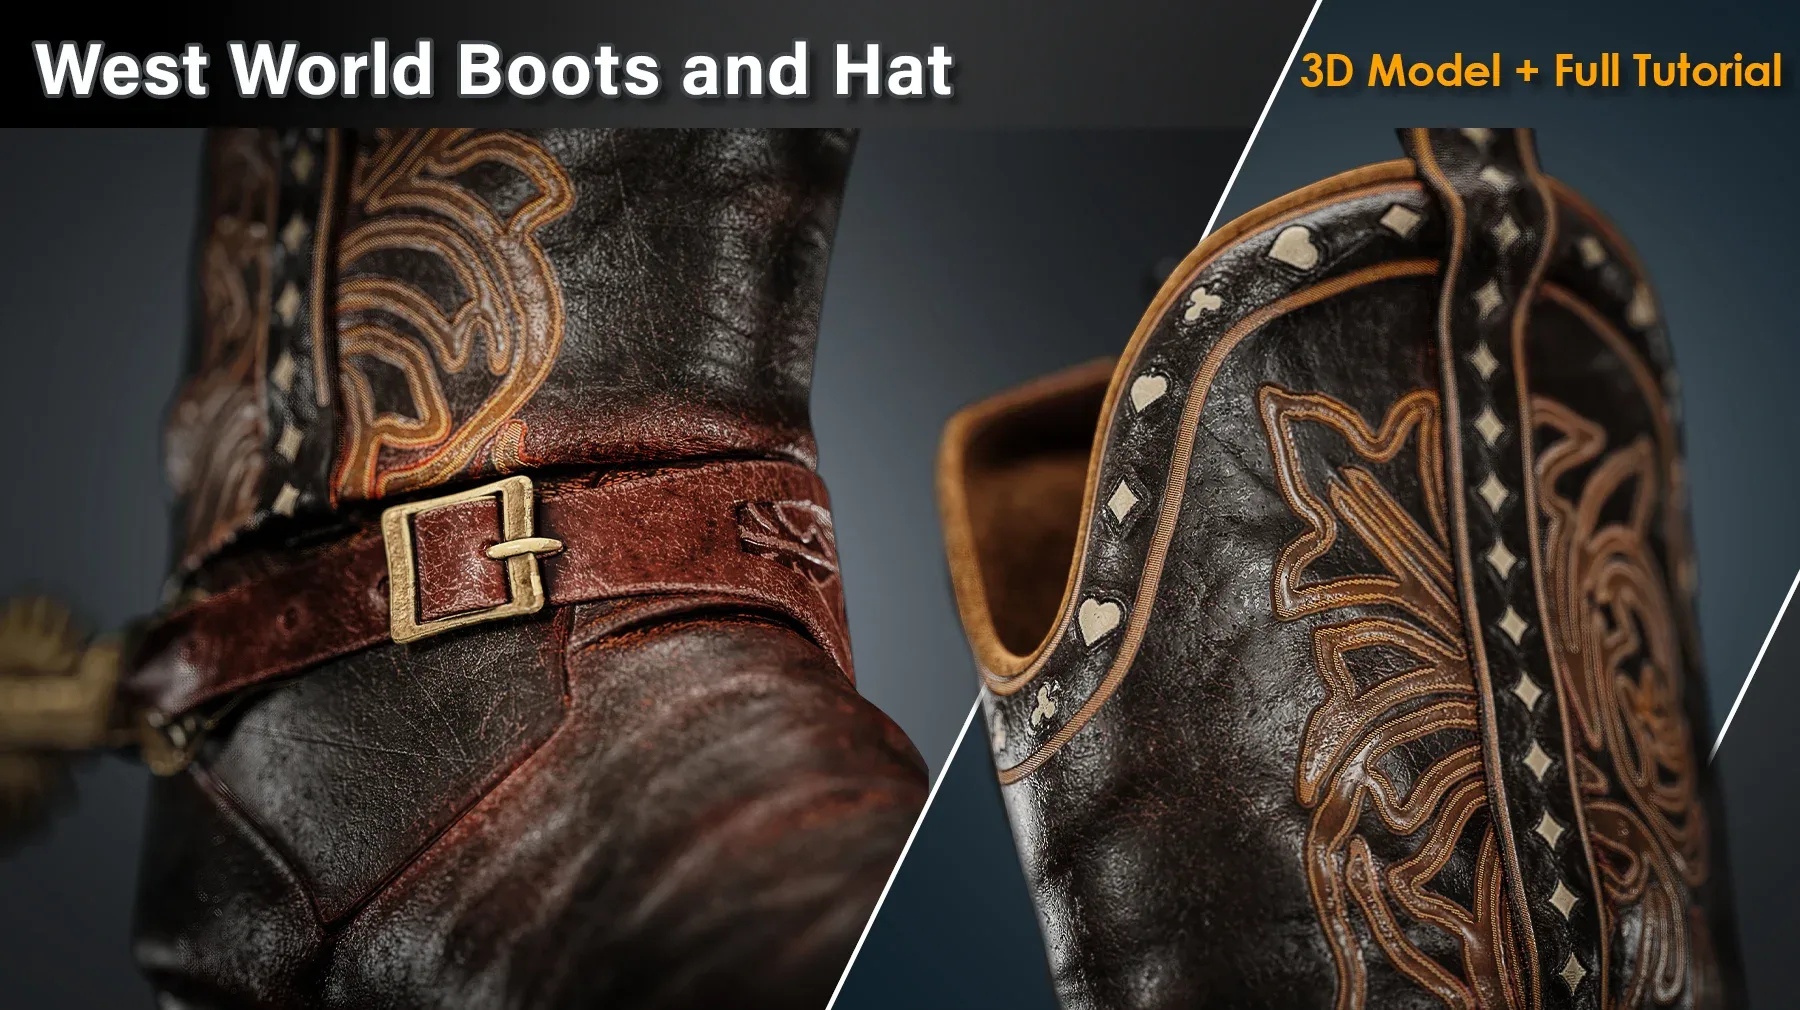 West World Boots and Hat / 3D Model + full Tutorial